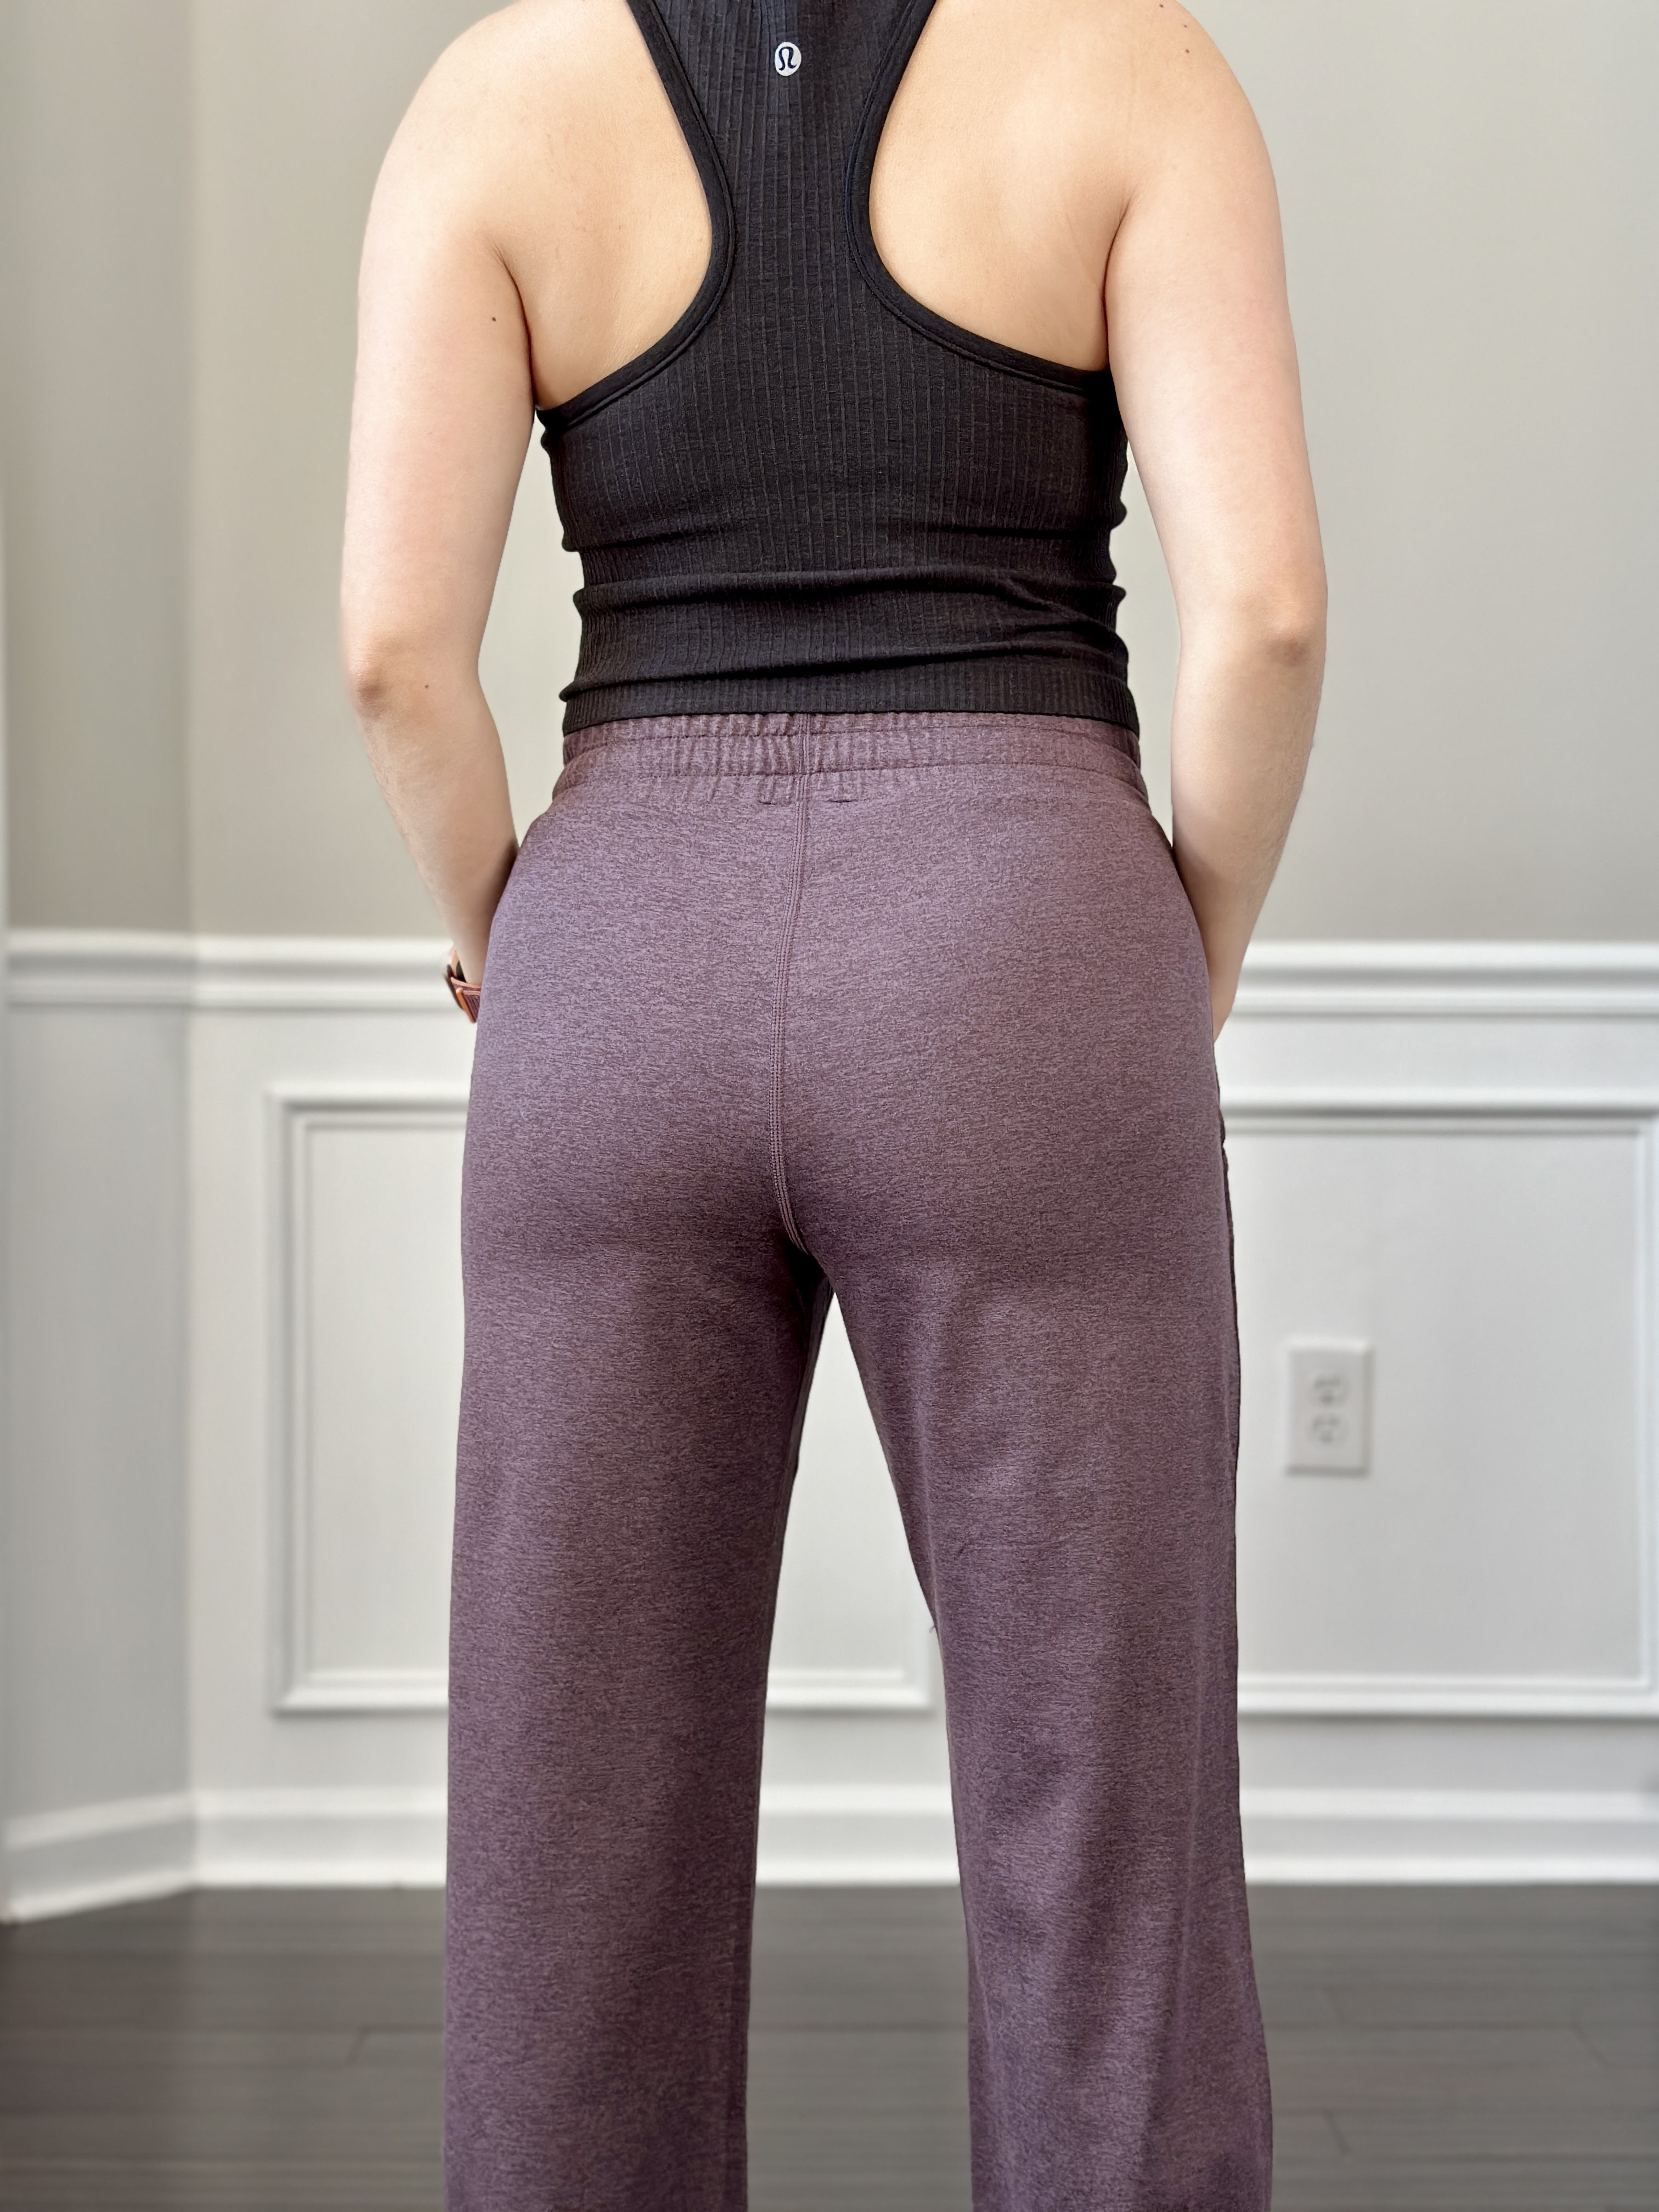 Fit Review Friday! Vuori Miles Ankle Pant and Halo Straight Leg Pant